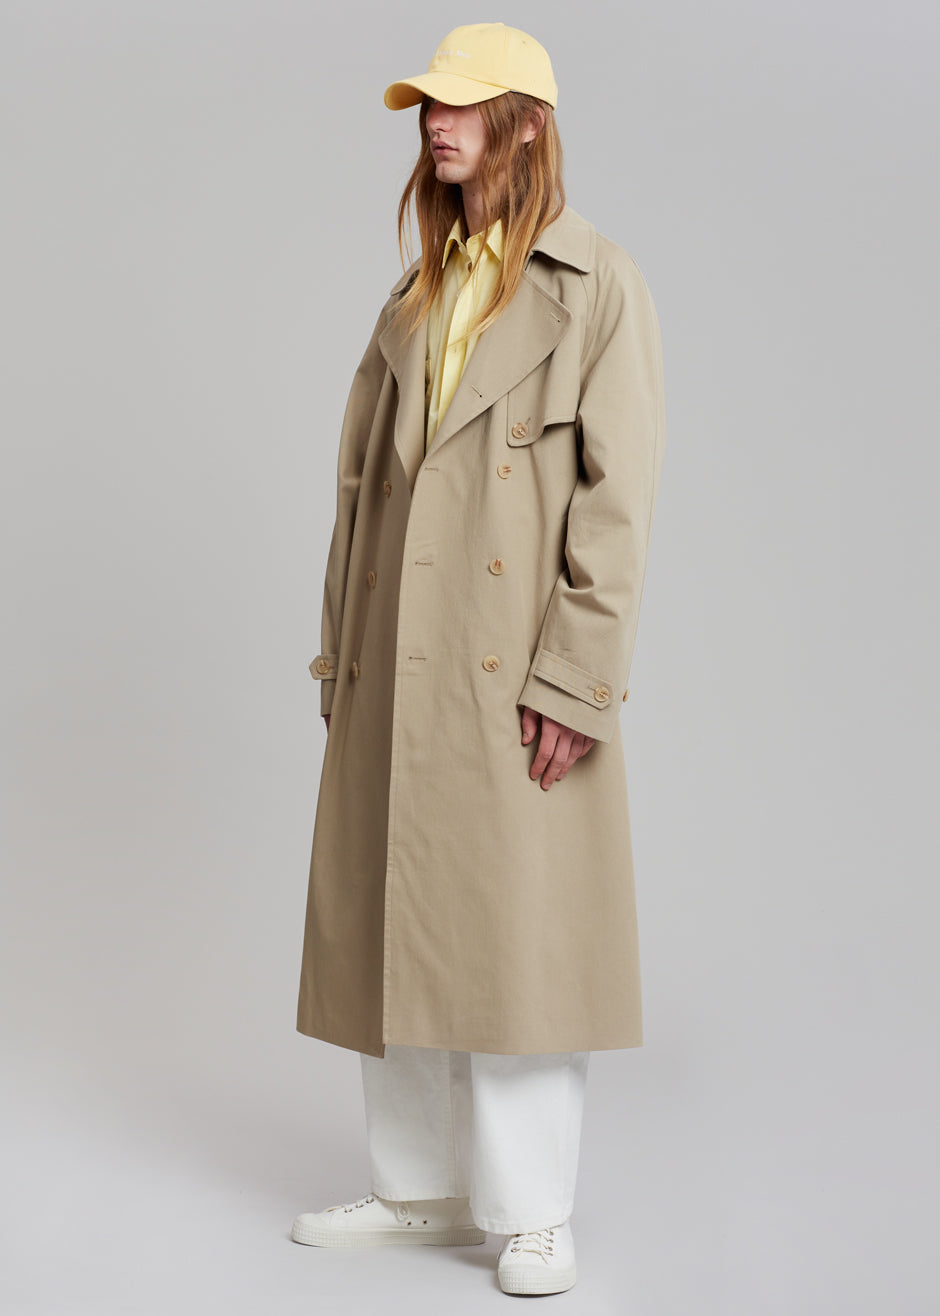 The Frankie Shop Connie Belted Trench Coat